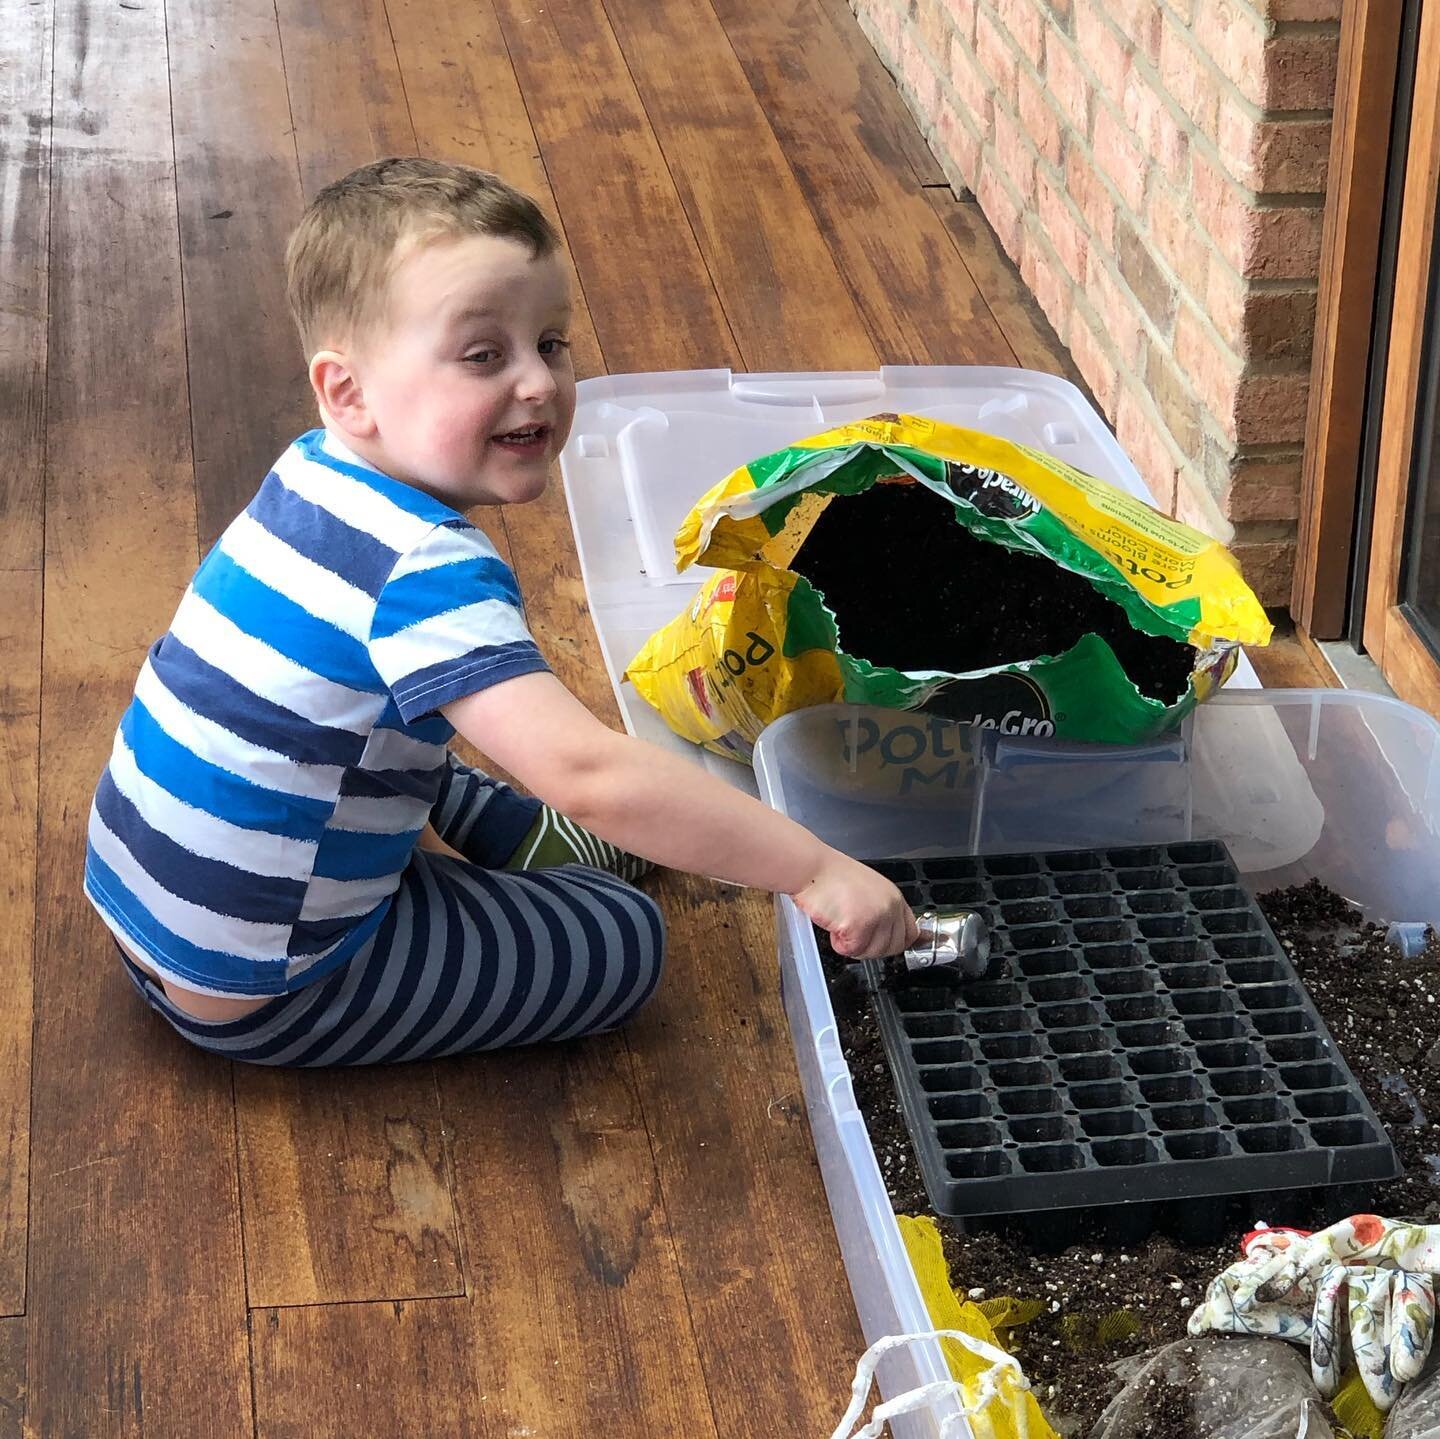 And to show us how it&rsquo;s done my soon to be 4 year old showing us how to fill a tray, plant the octopus (ranunculus) and finish with some water! He&rsquo;s a pro!!